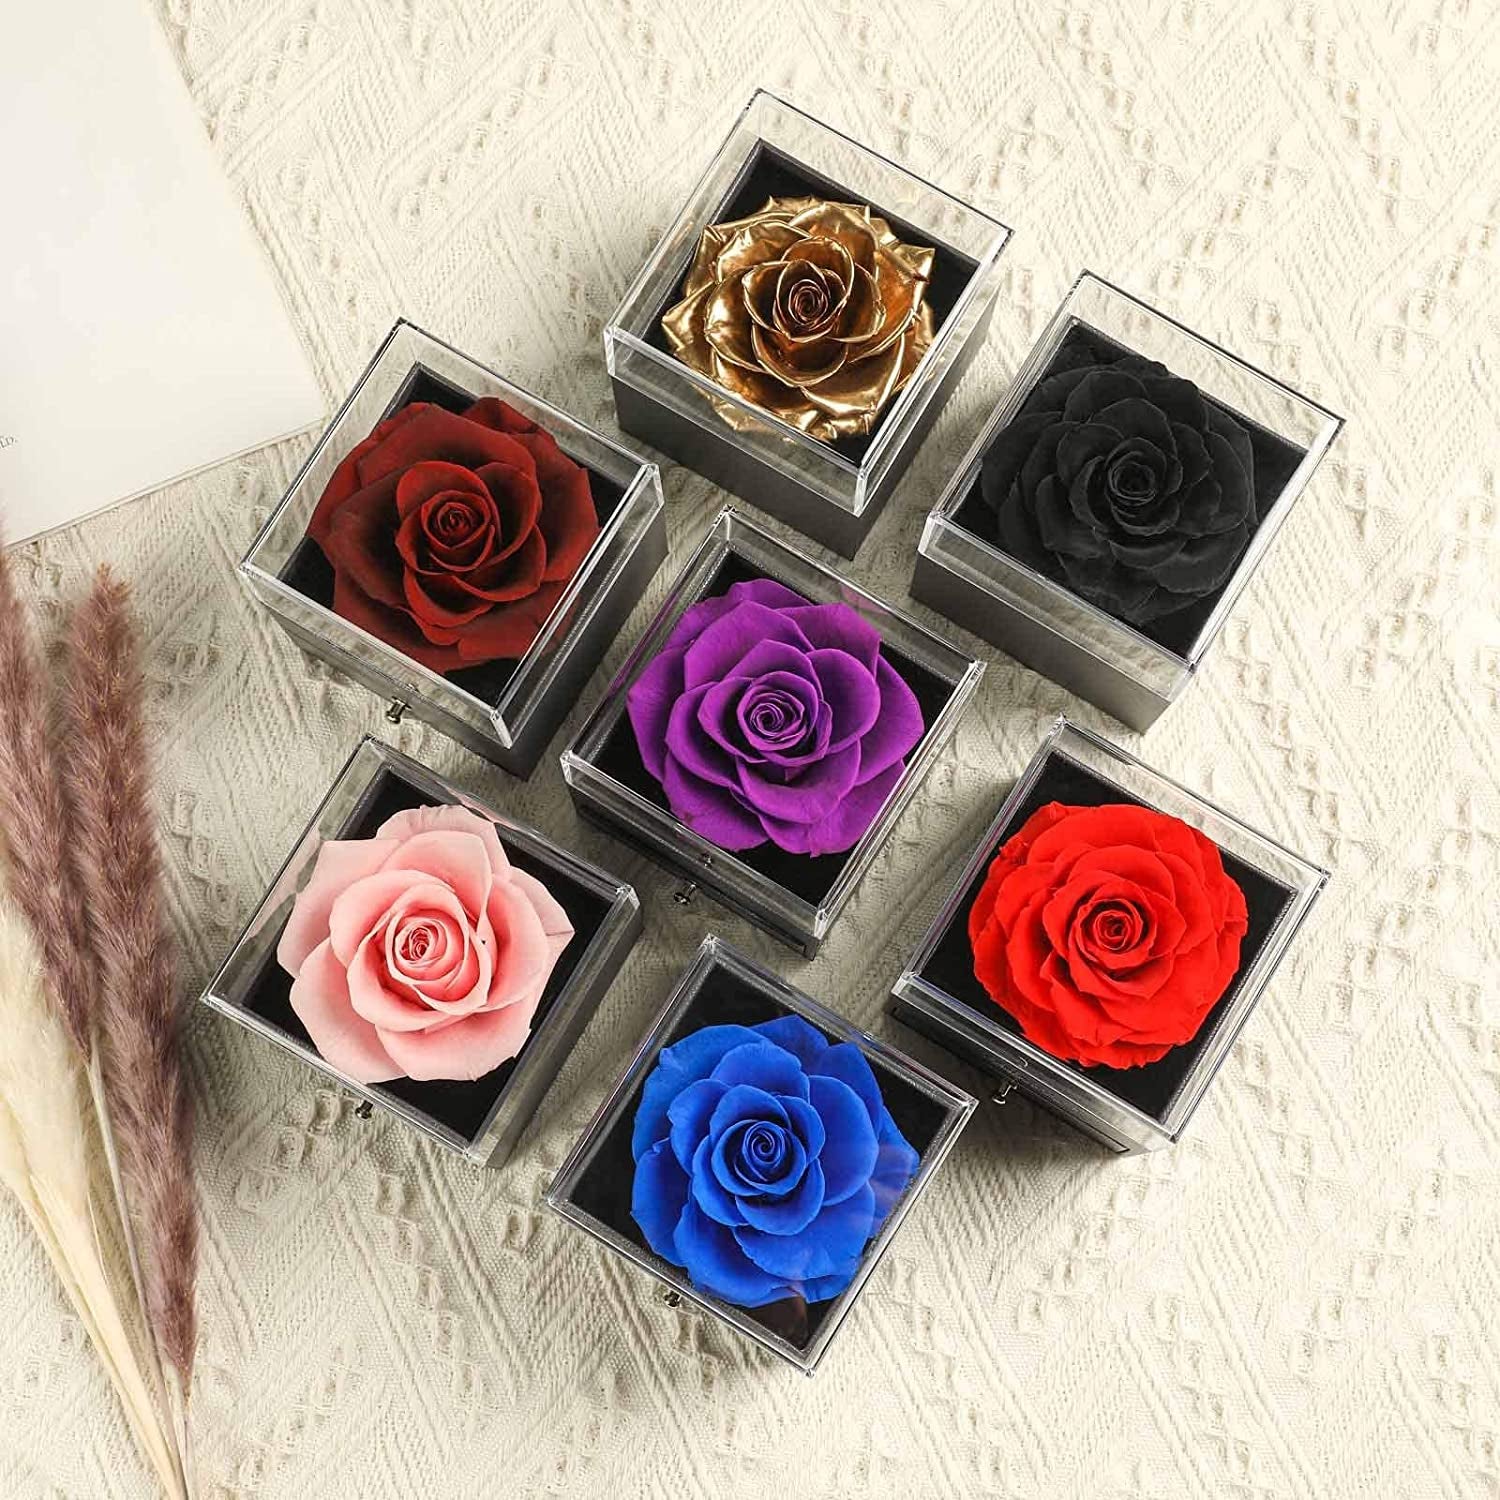 Preserved Real Rose Drawer with Heart Necklace I Love You in 100 Languages Gift Set, Handmade Enchanted Real Rose Flower for Valentines Day Anniversary Birthday Romantic Gifts for Her (Golden)